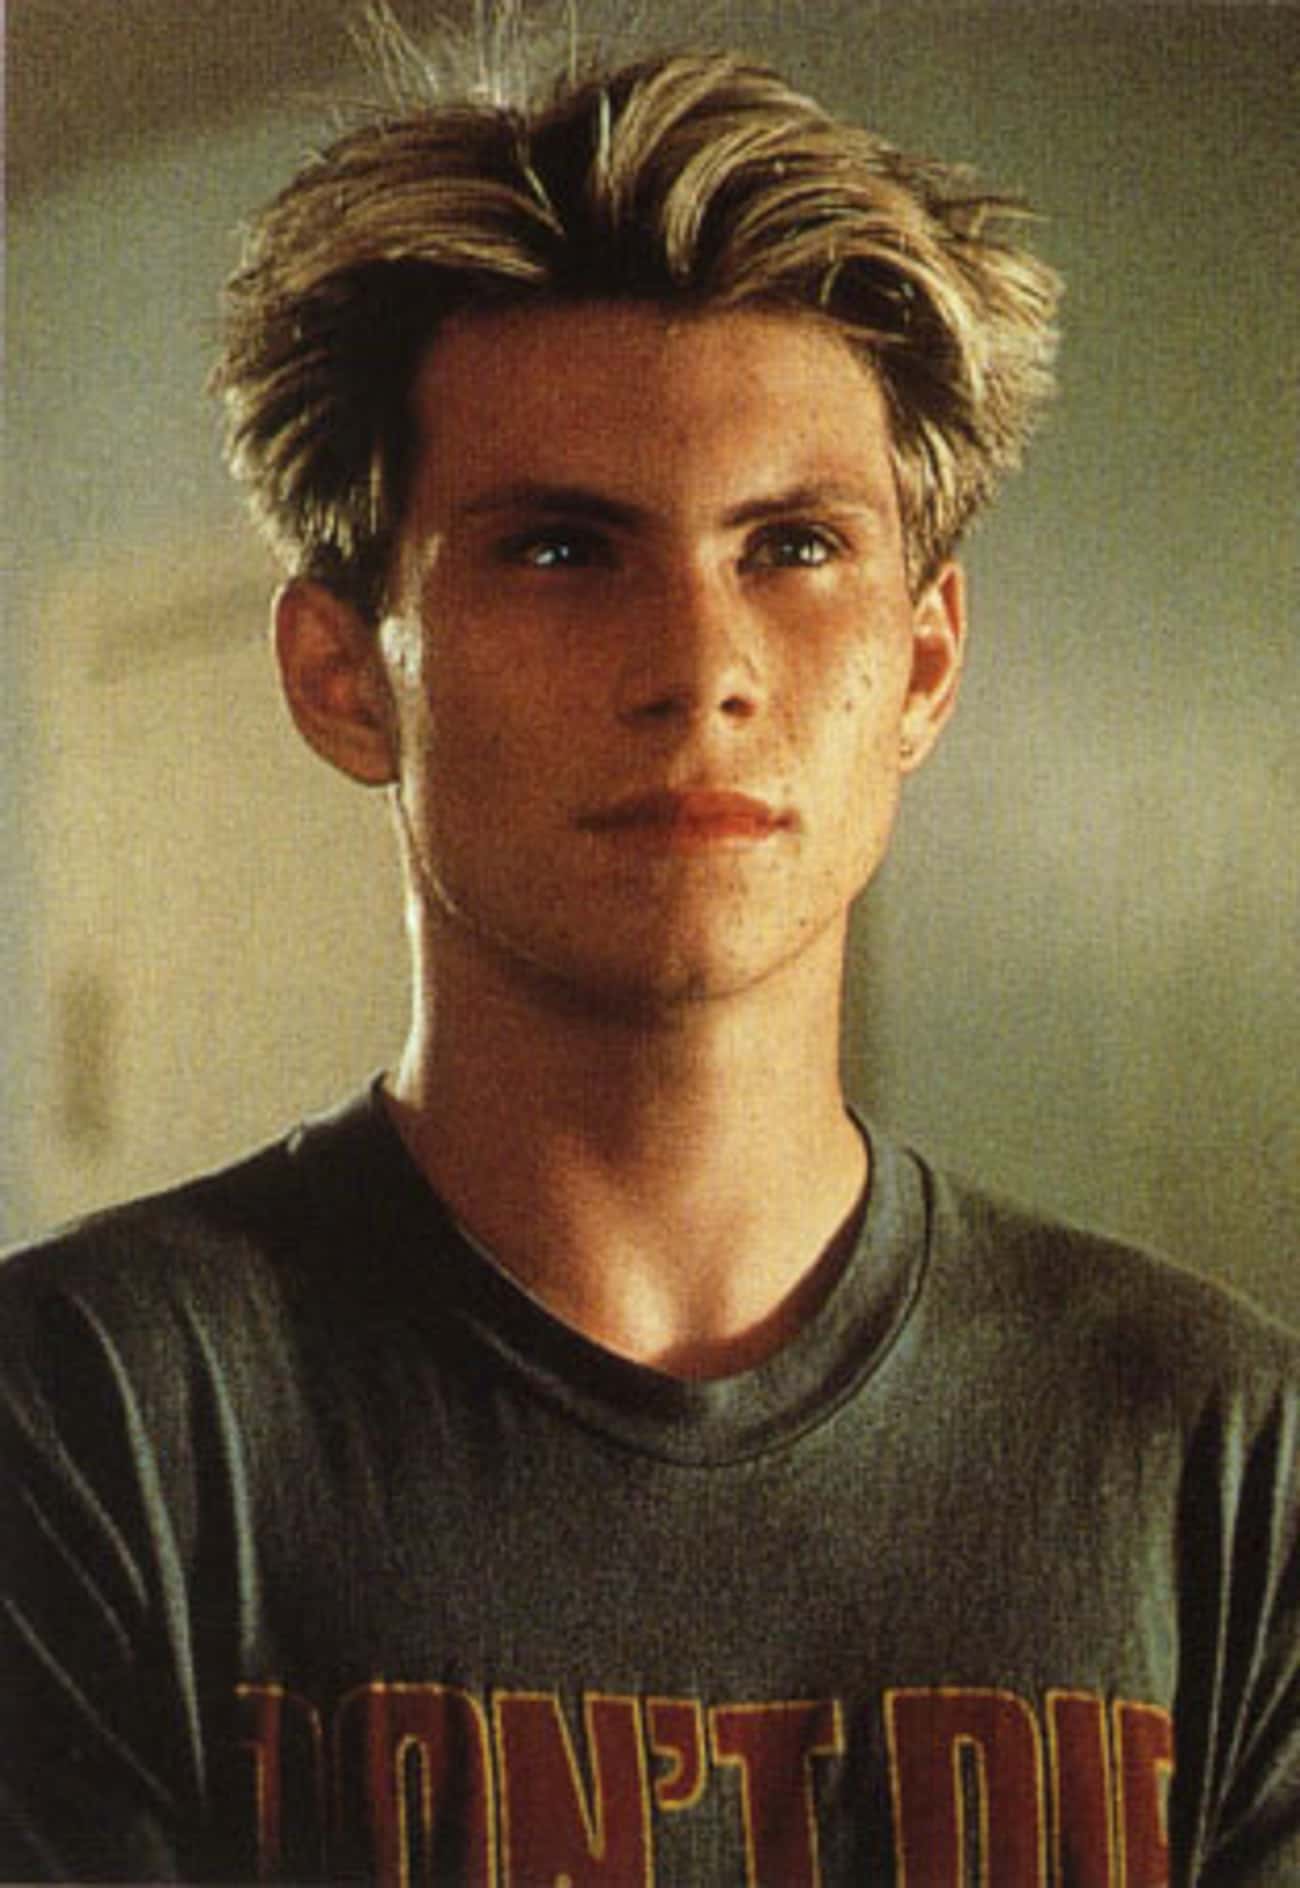 Young Christian Slater in Gray Printed T-Shirt